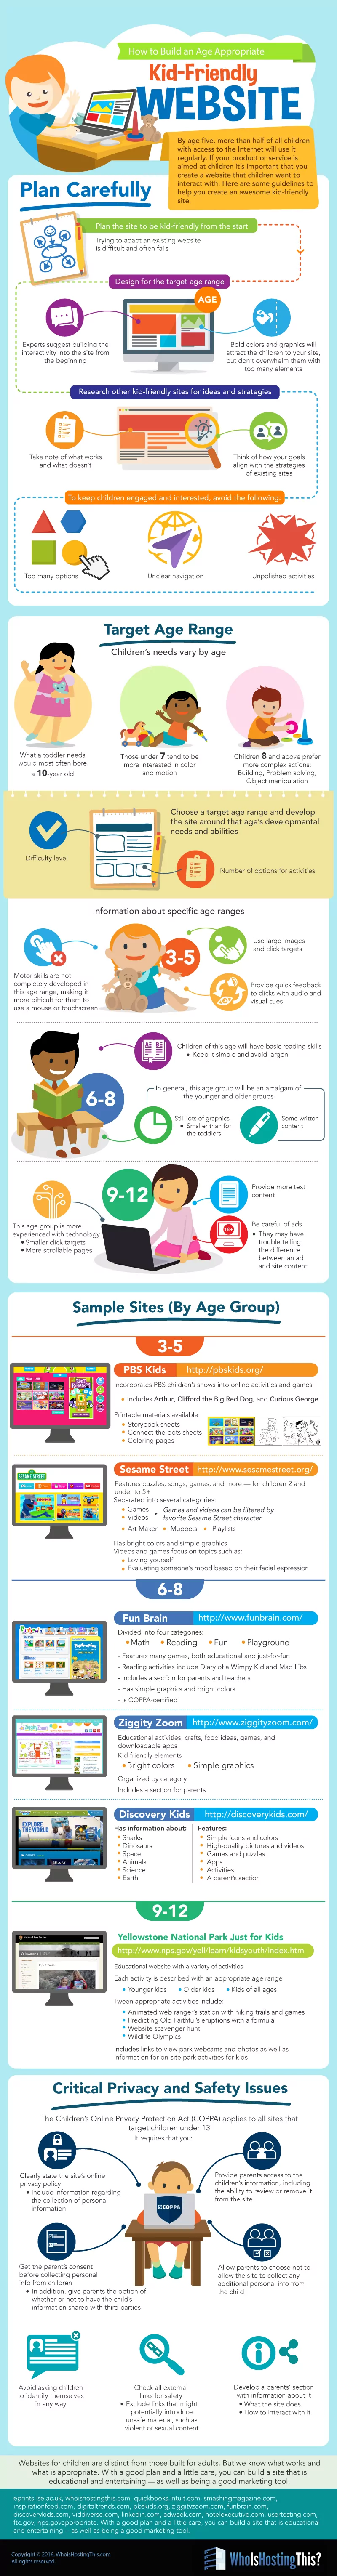 An Interesting Visual Guide on How to Create Kid Friendly Websites